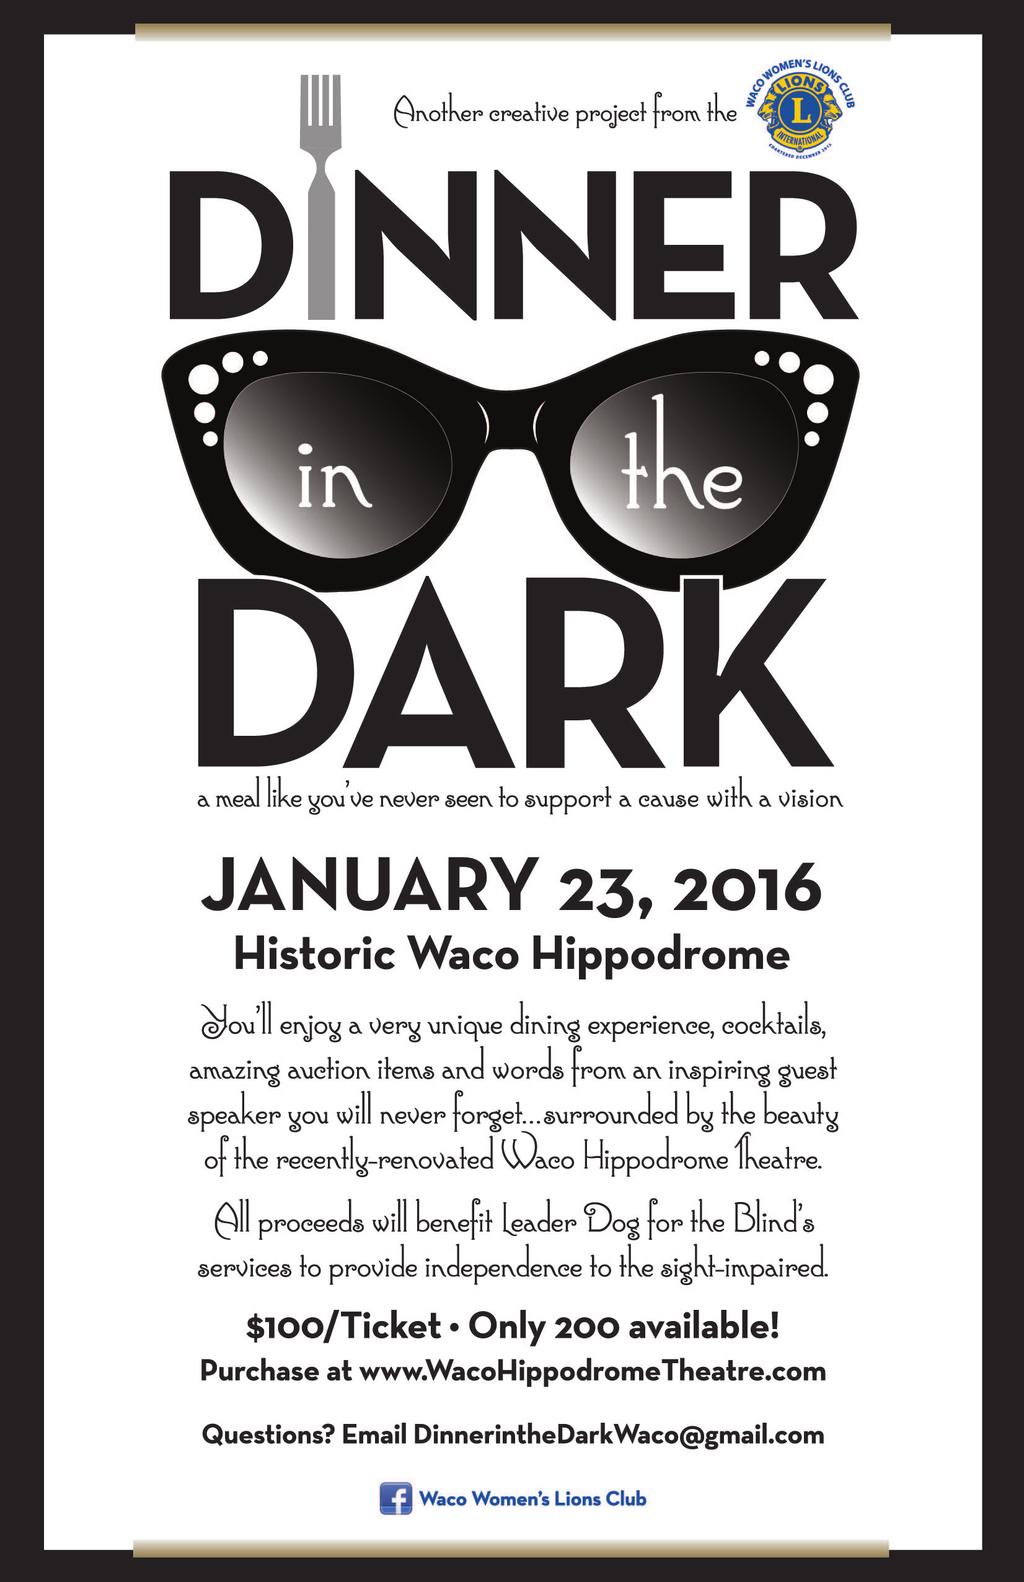 DISTRICT 2-X3 NEWS DECEMBER 2015 PAGE 20 Waco Women s Lions Club Tickets for Dinner in the Dark are now on sale at www.wacohippodrometheatre.com.